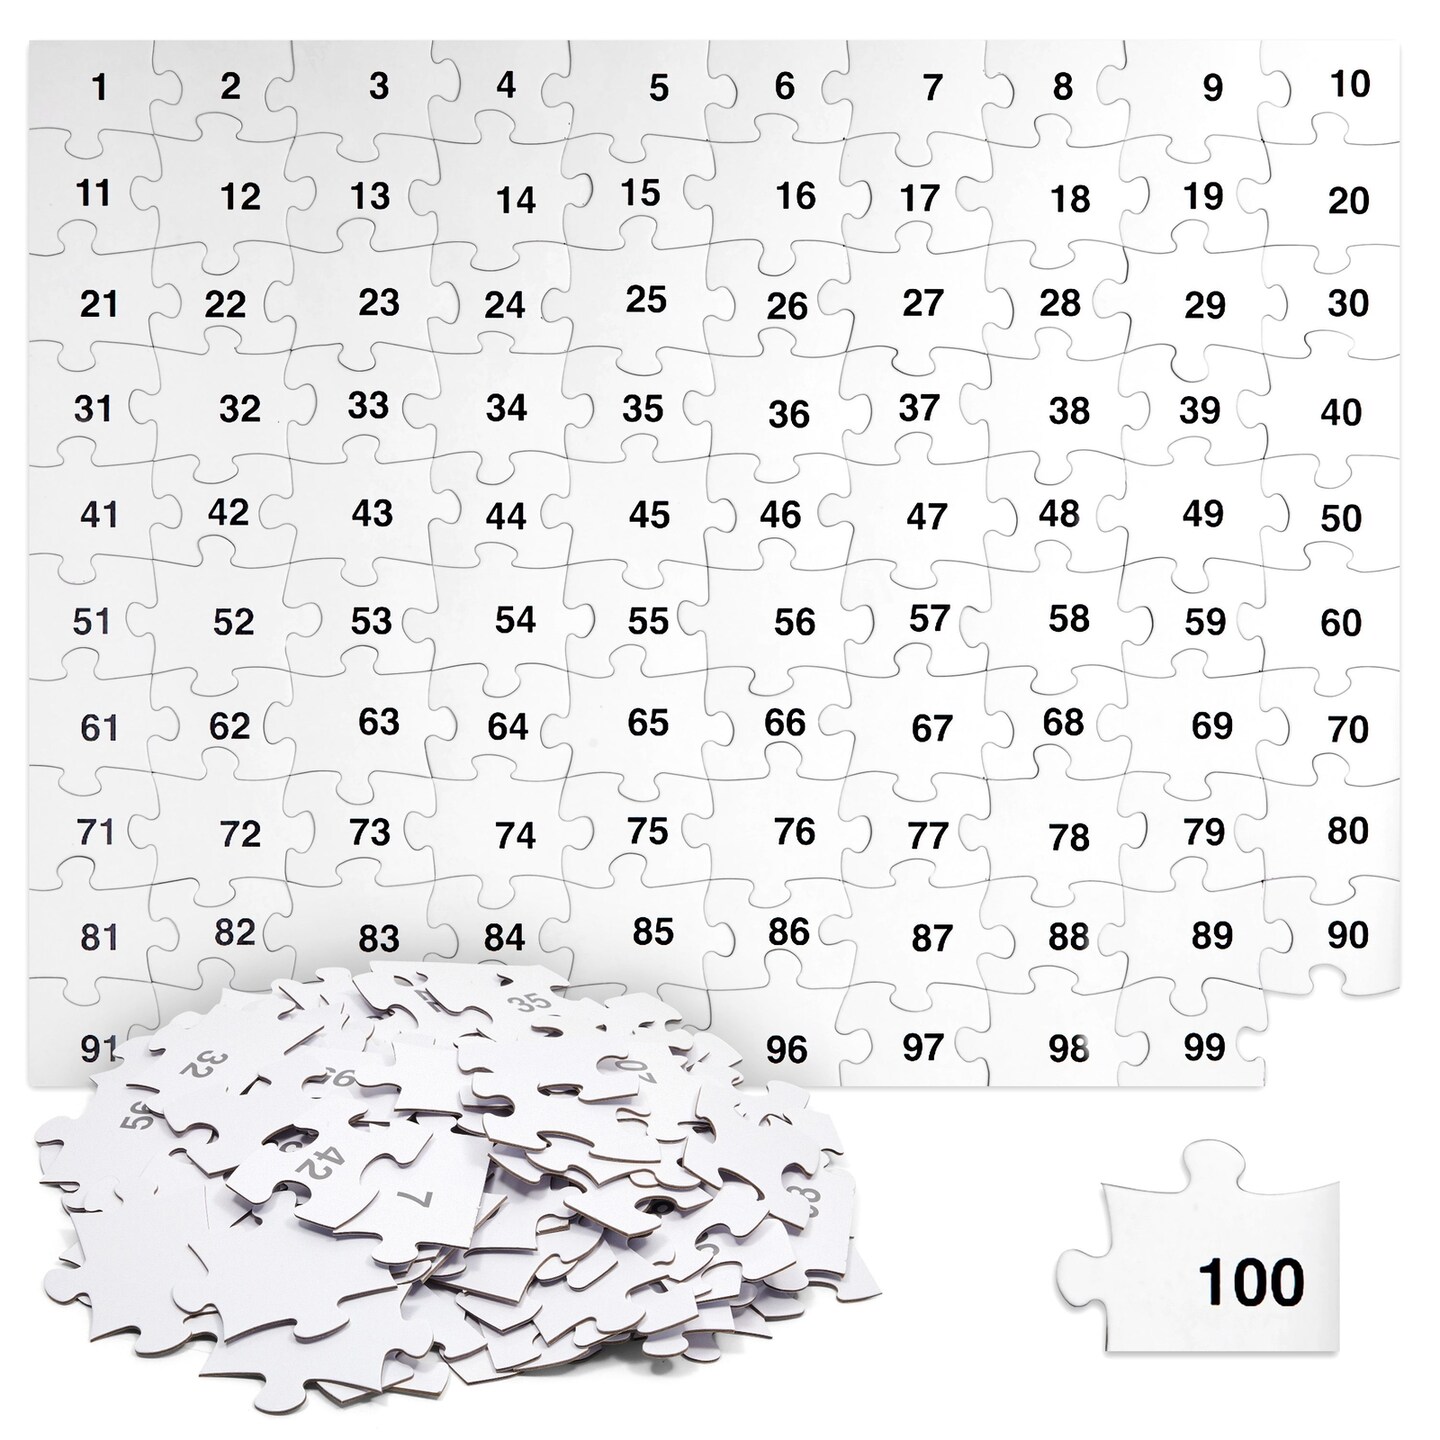 100 Pieces Blank Puzzles to Draw On, 27x36 inches Large Make Your Own Jigsaw Puzzle for DIY Wedding Guest Book, Kids Crafts